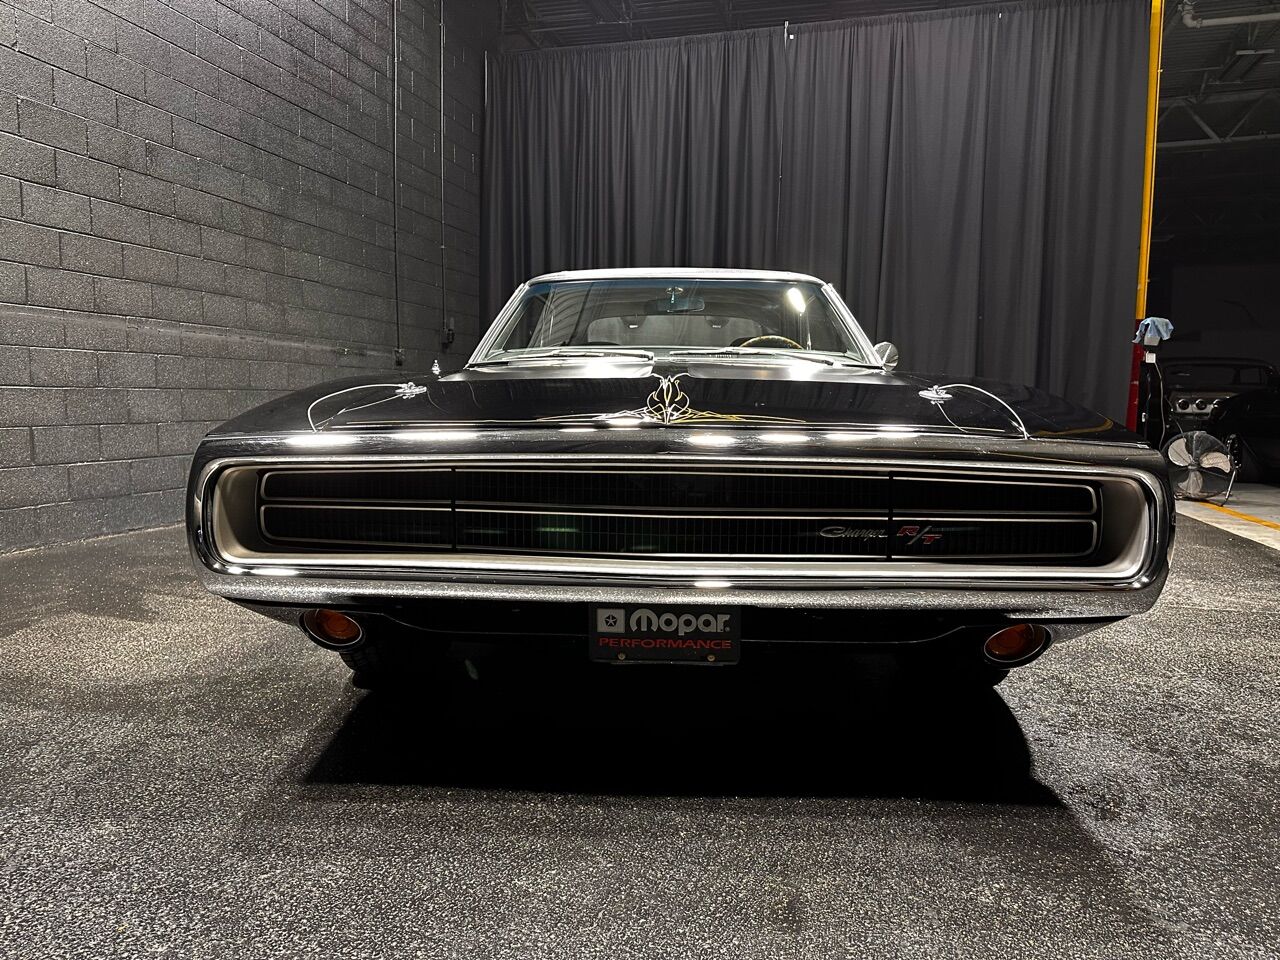 1970 Dodge Charger 9